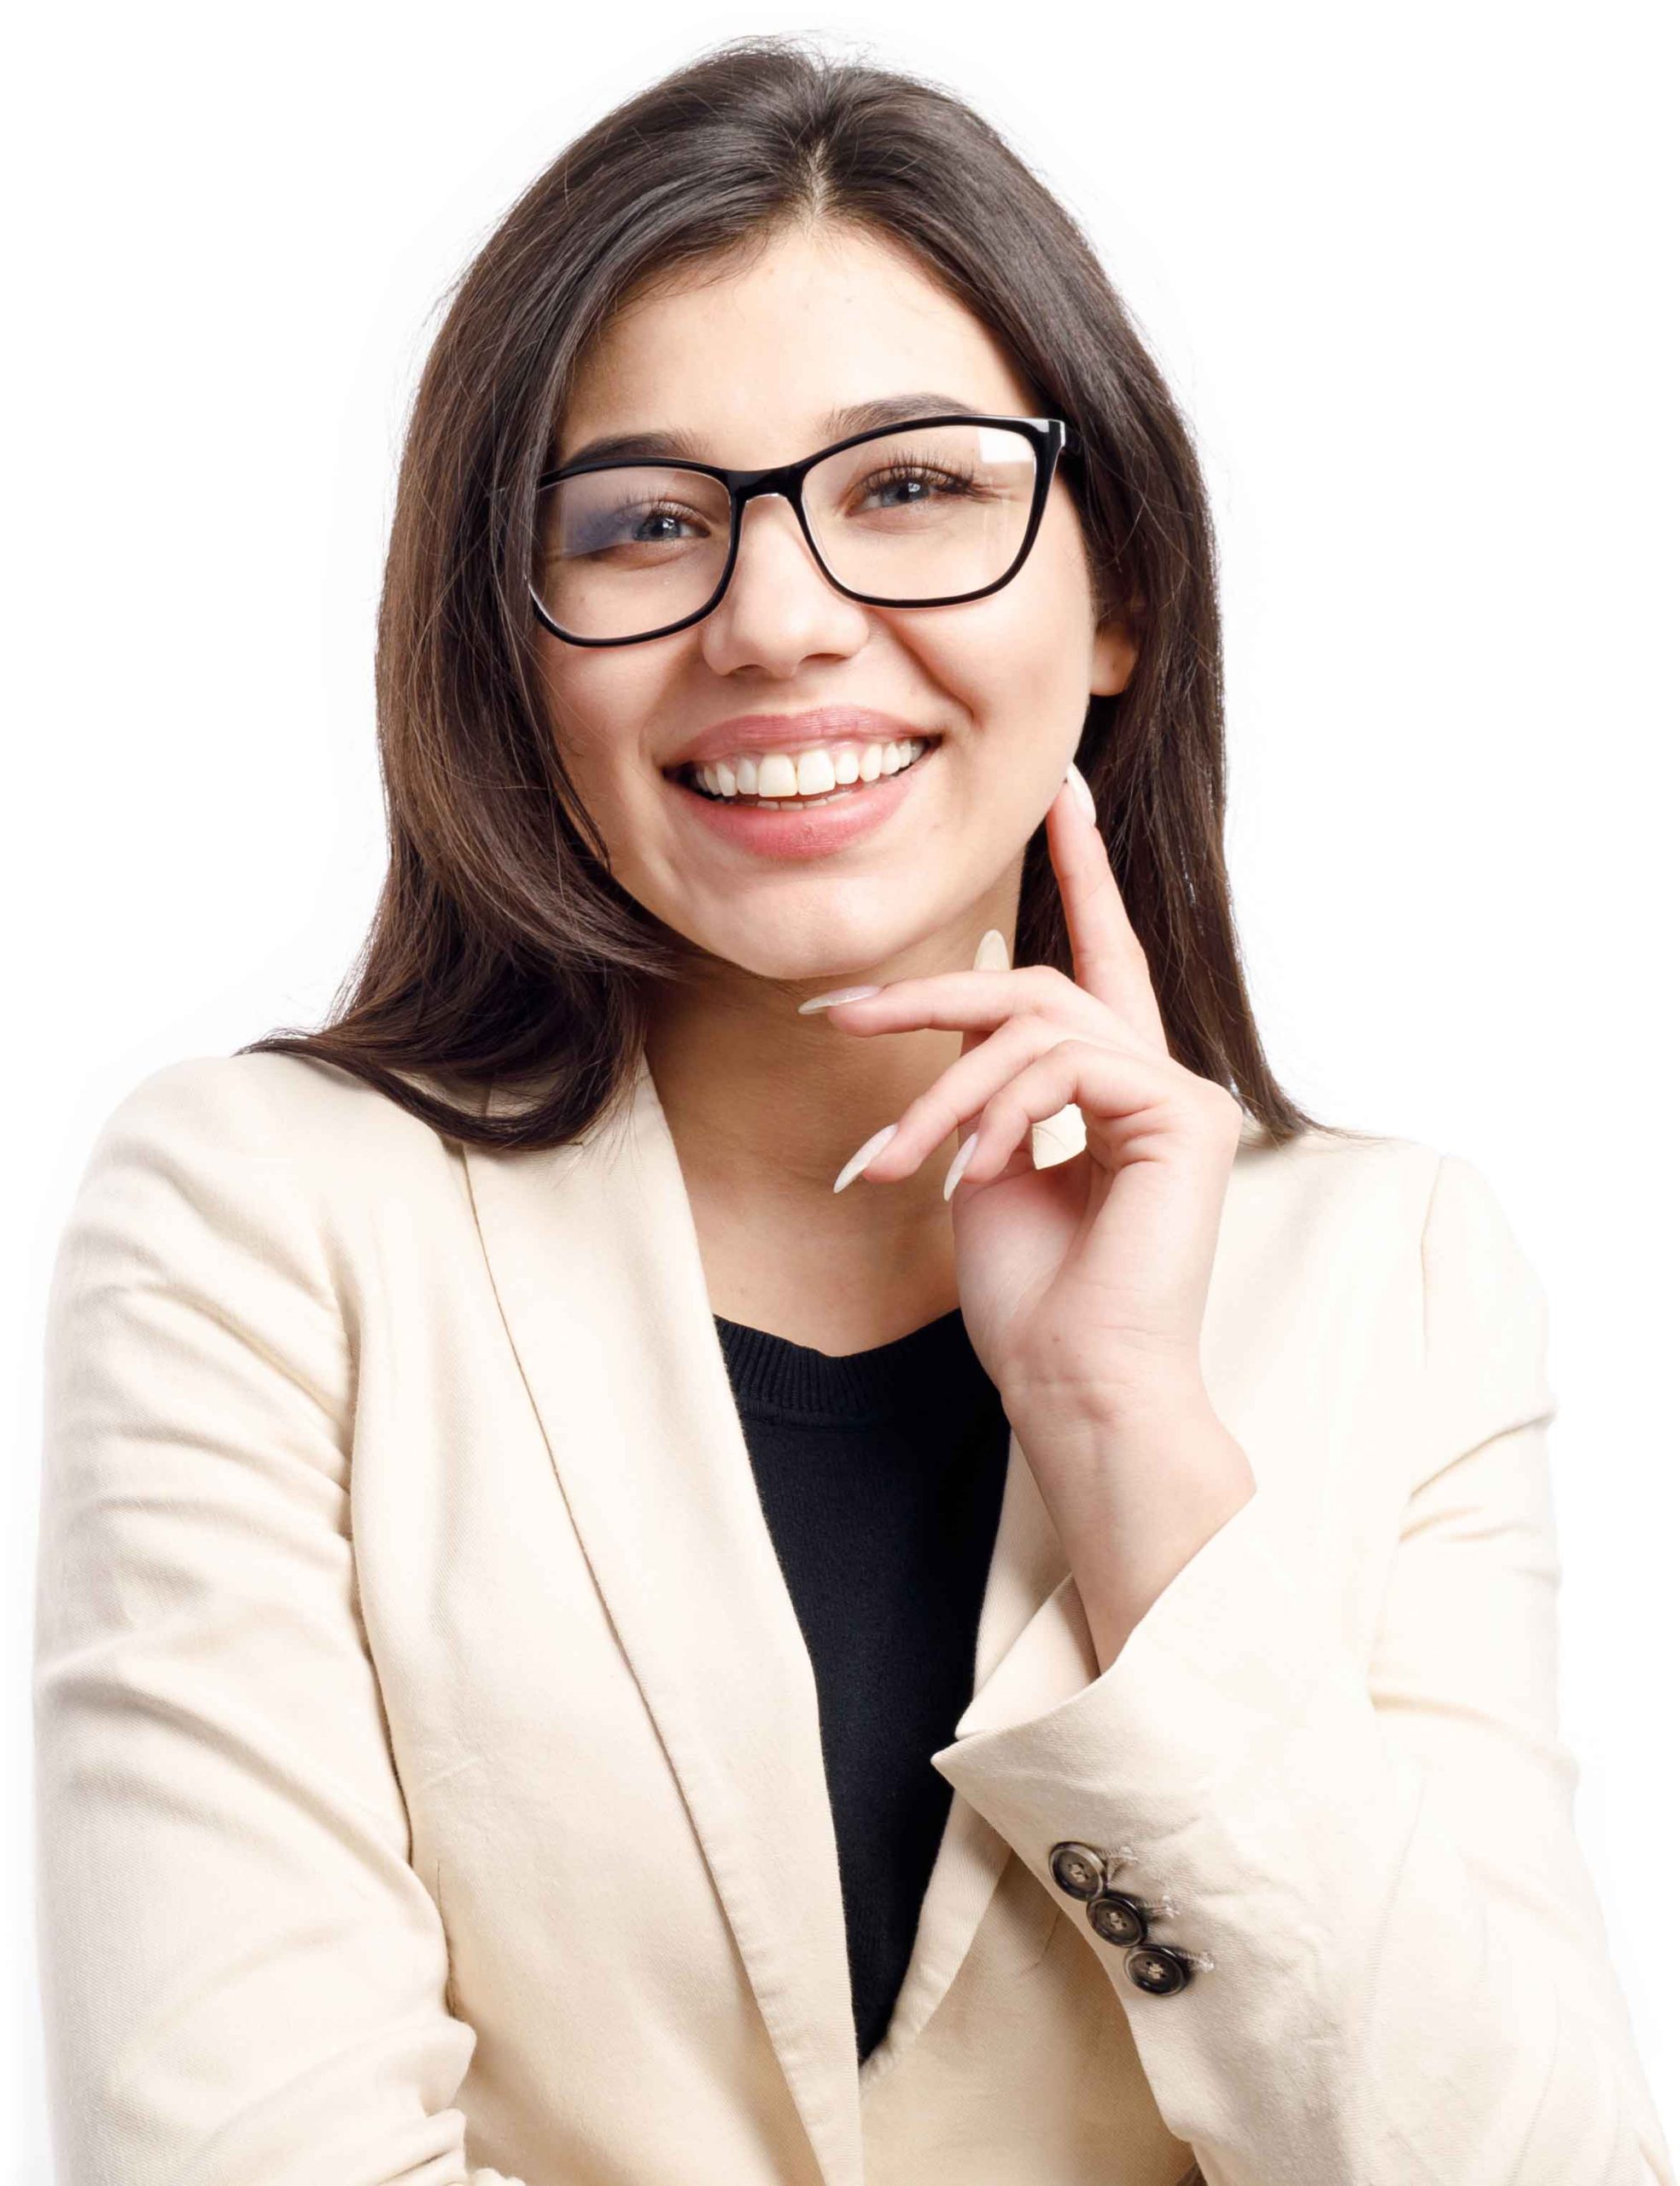 <br />
Women's naturopathic doctor smiling, wearing glasses and casual business attire.